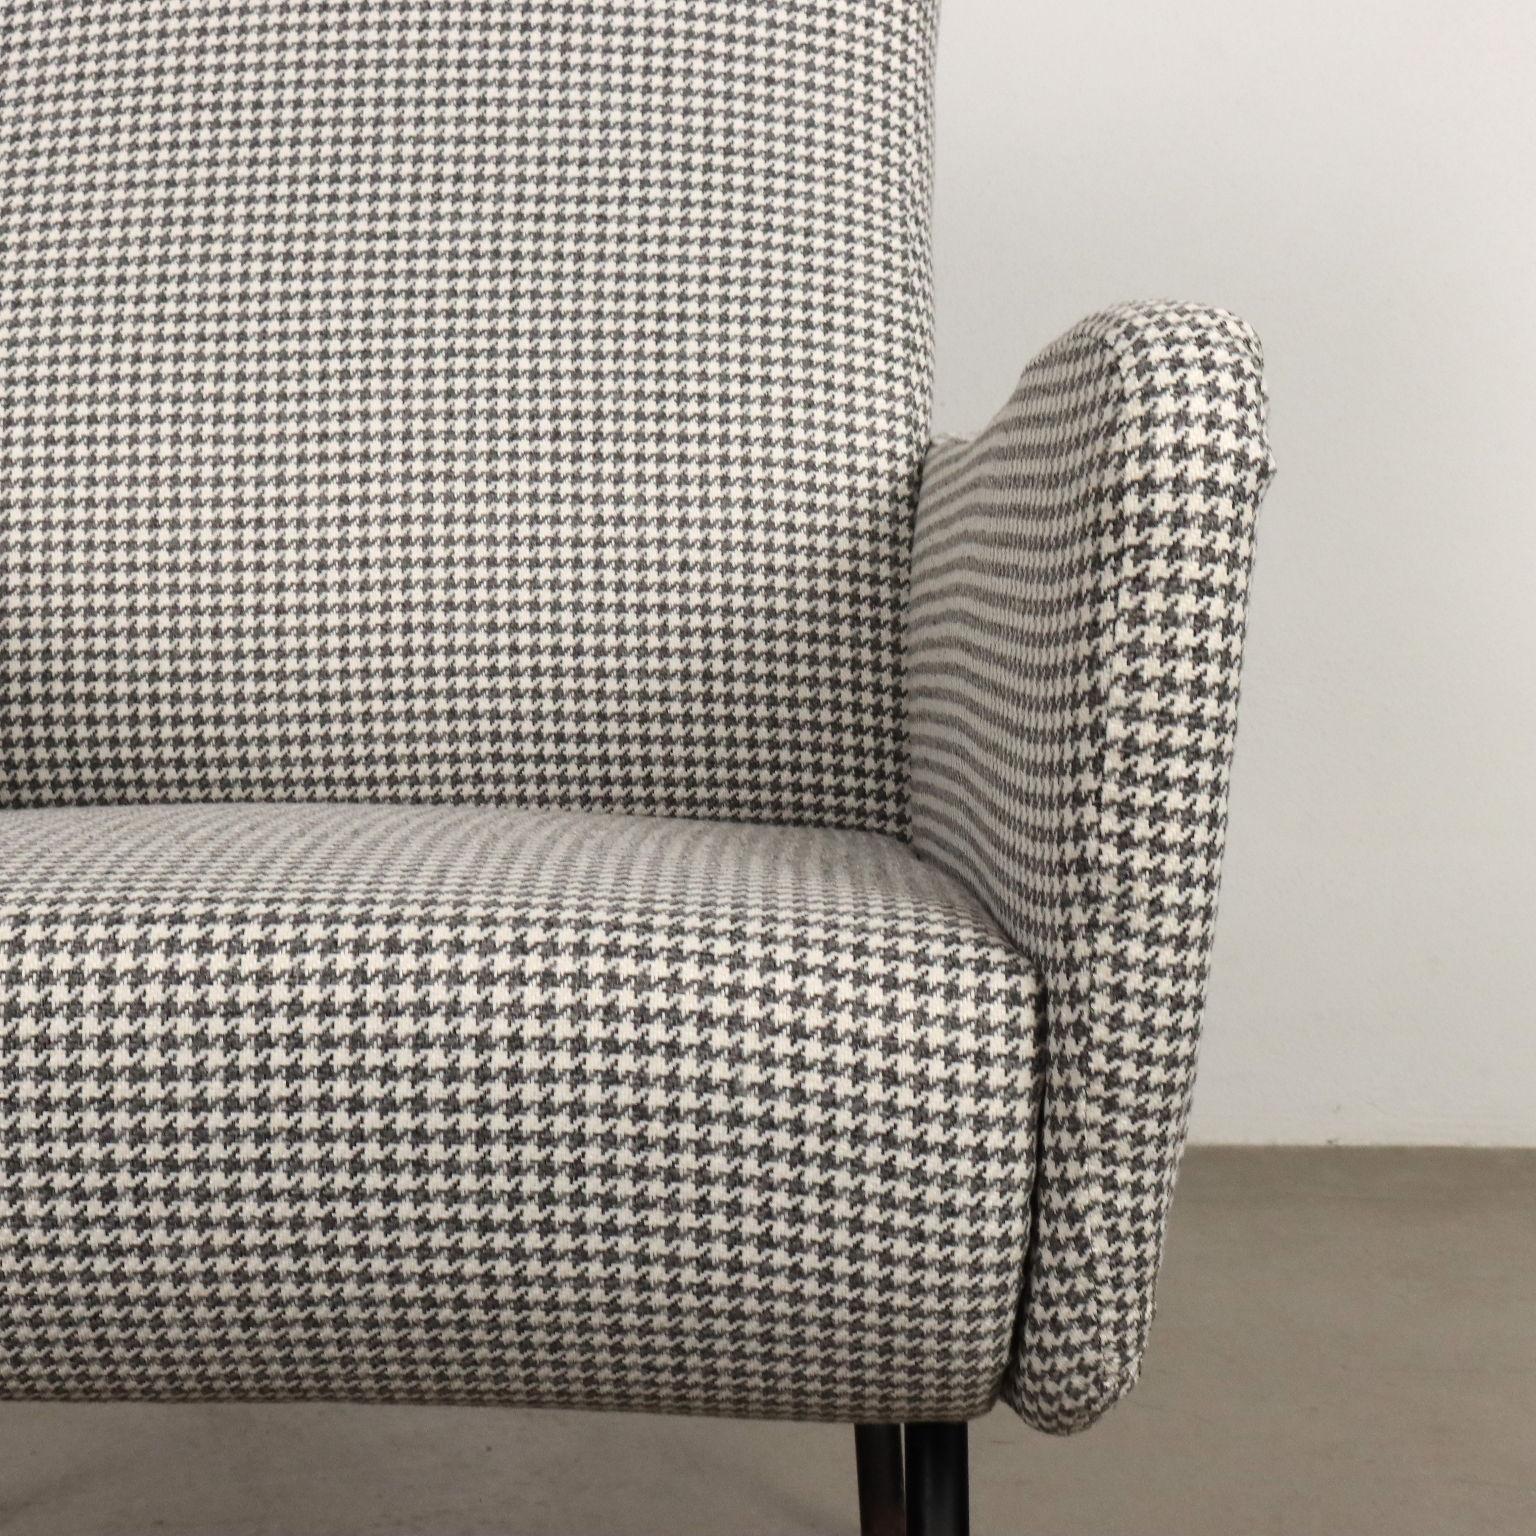 Mid-20th Century Pair of Houndstooth Armchairs 1950s-1960s For Sale